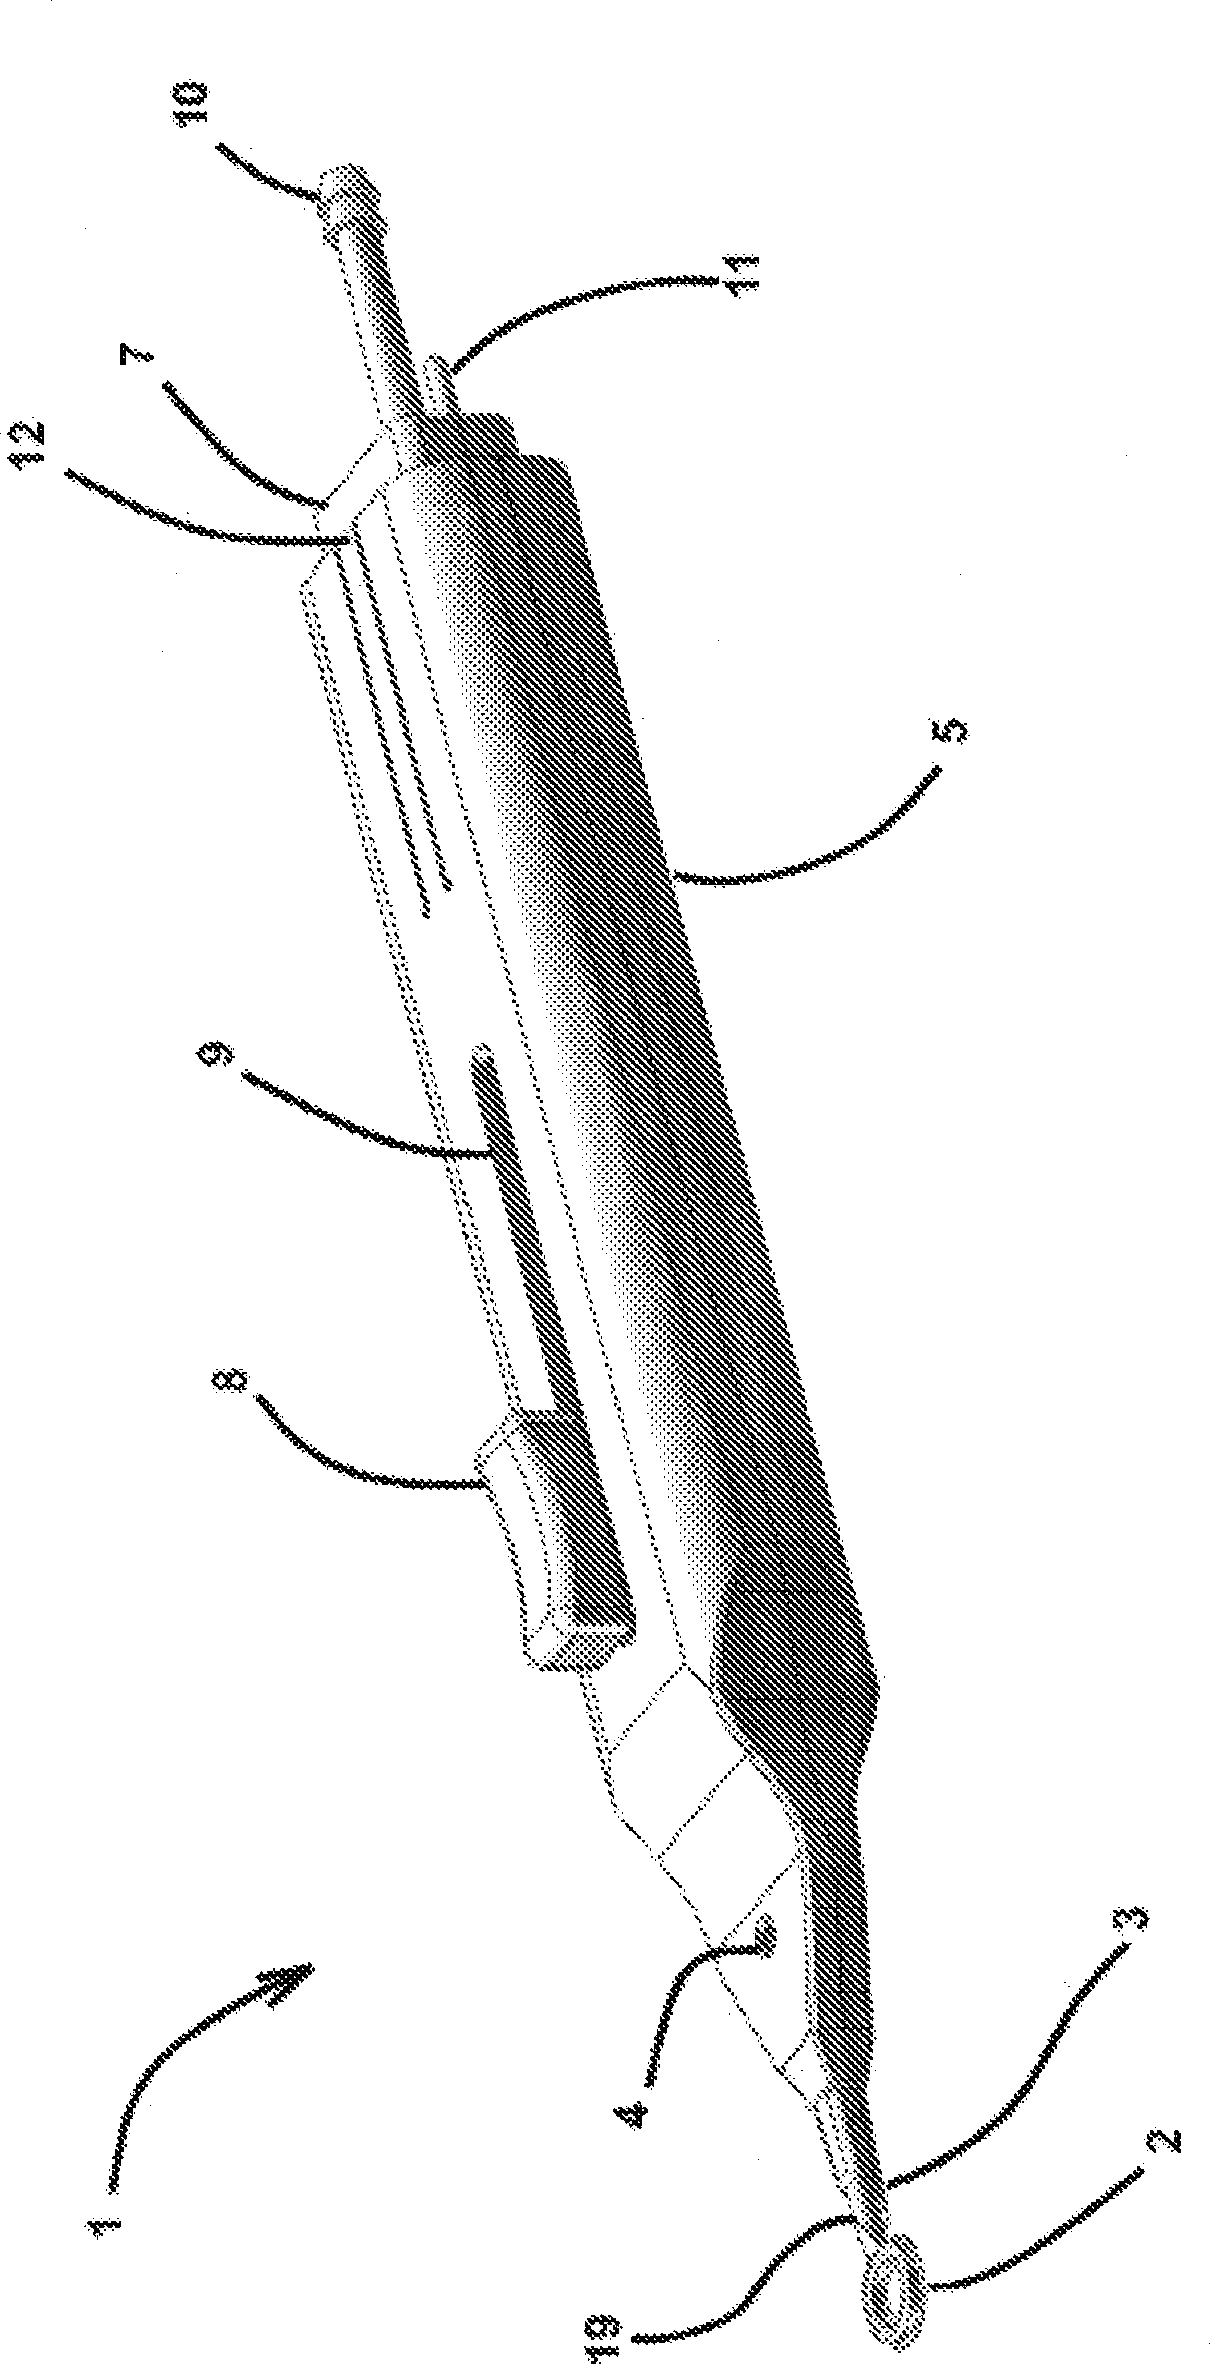 Ophthalmic surgical device for accessing tissue and for performing a capsulotomy